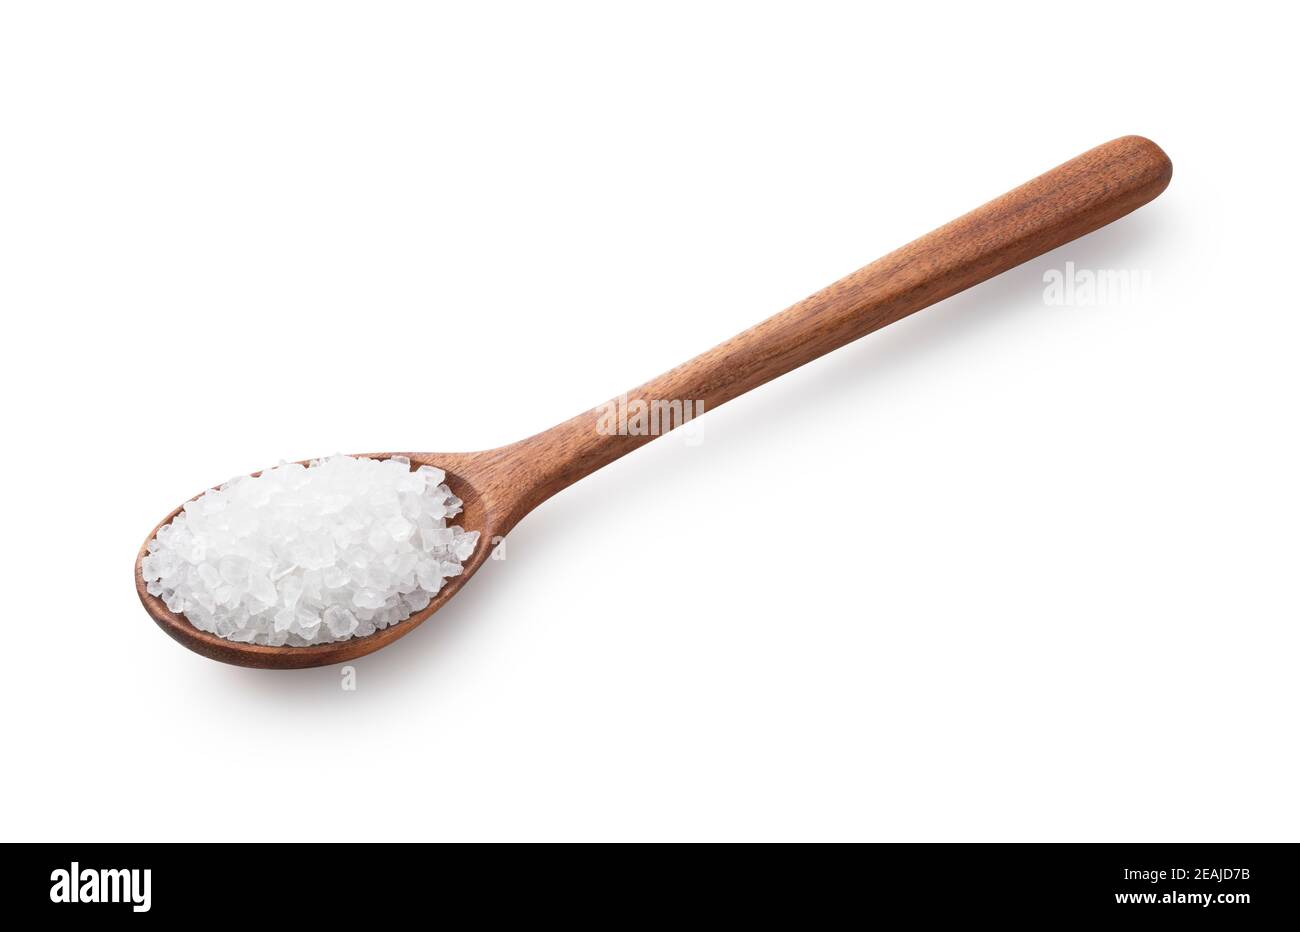 Himalayan rock salt in a spoon placed on a white background Stock Photo